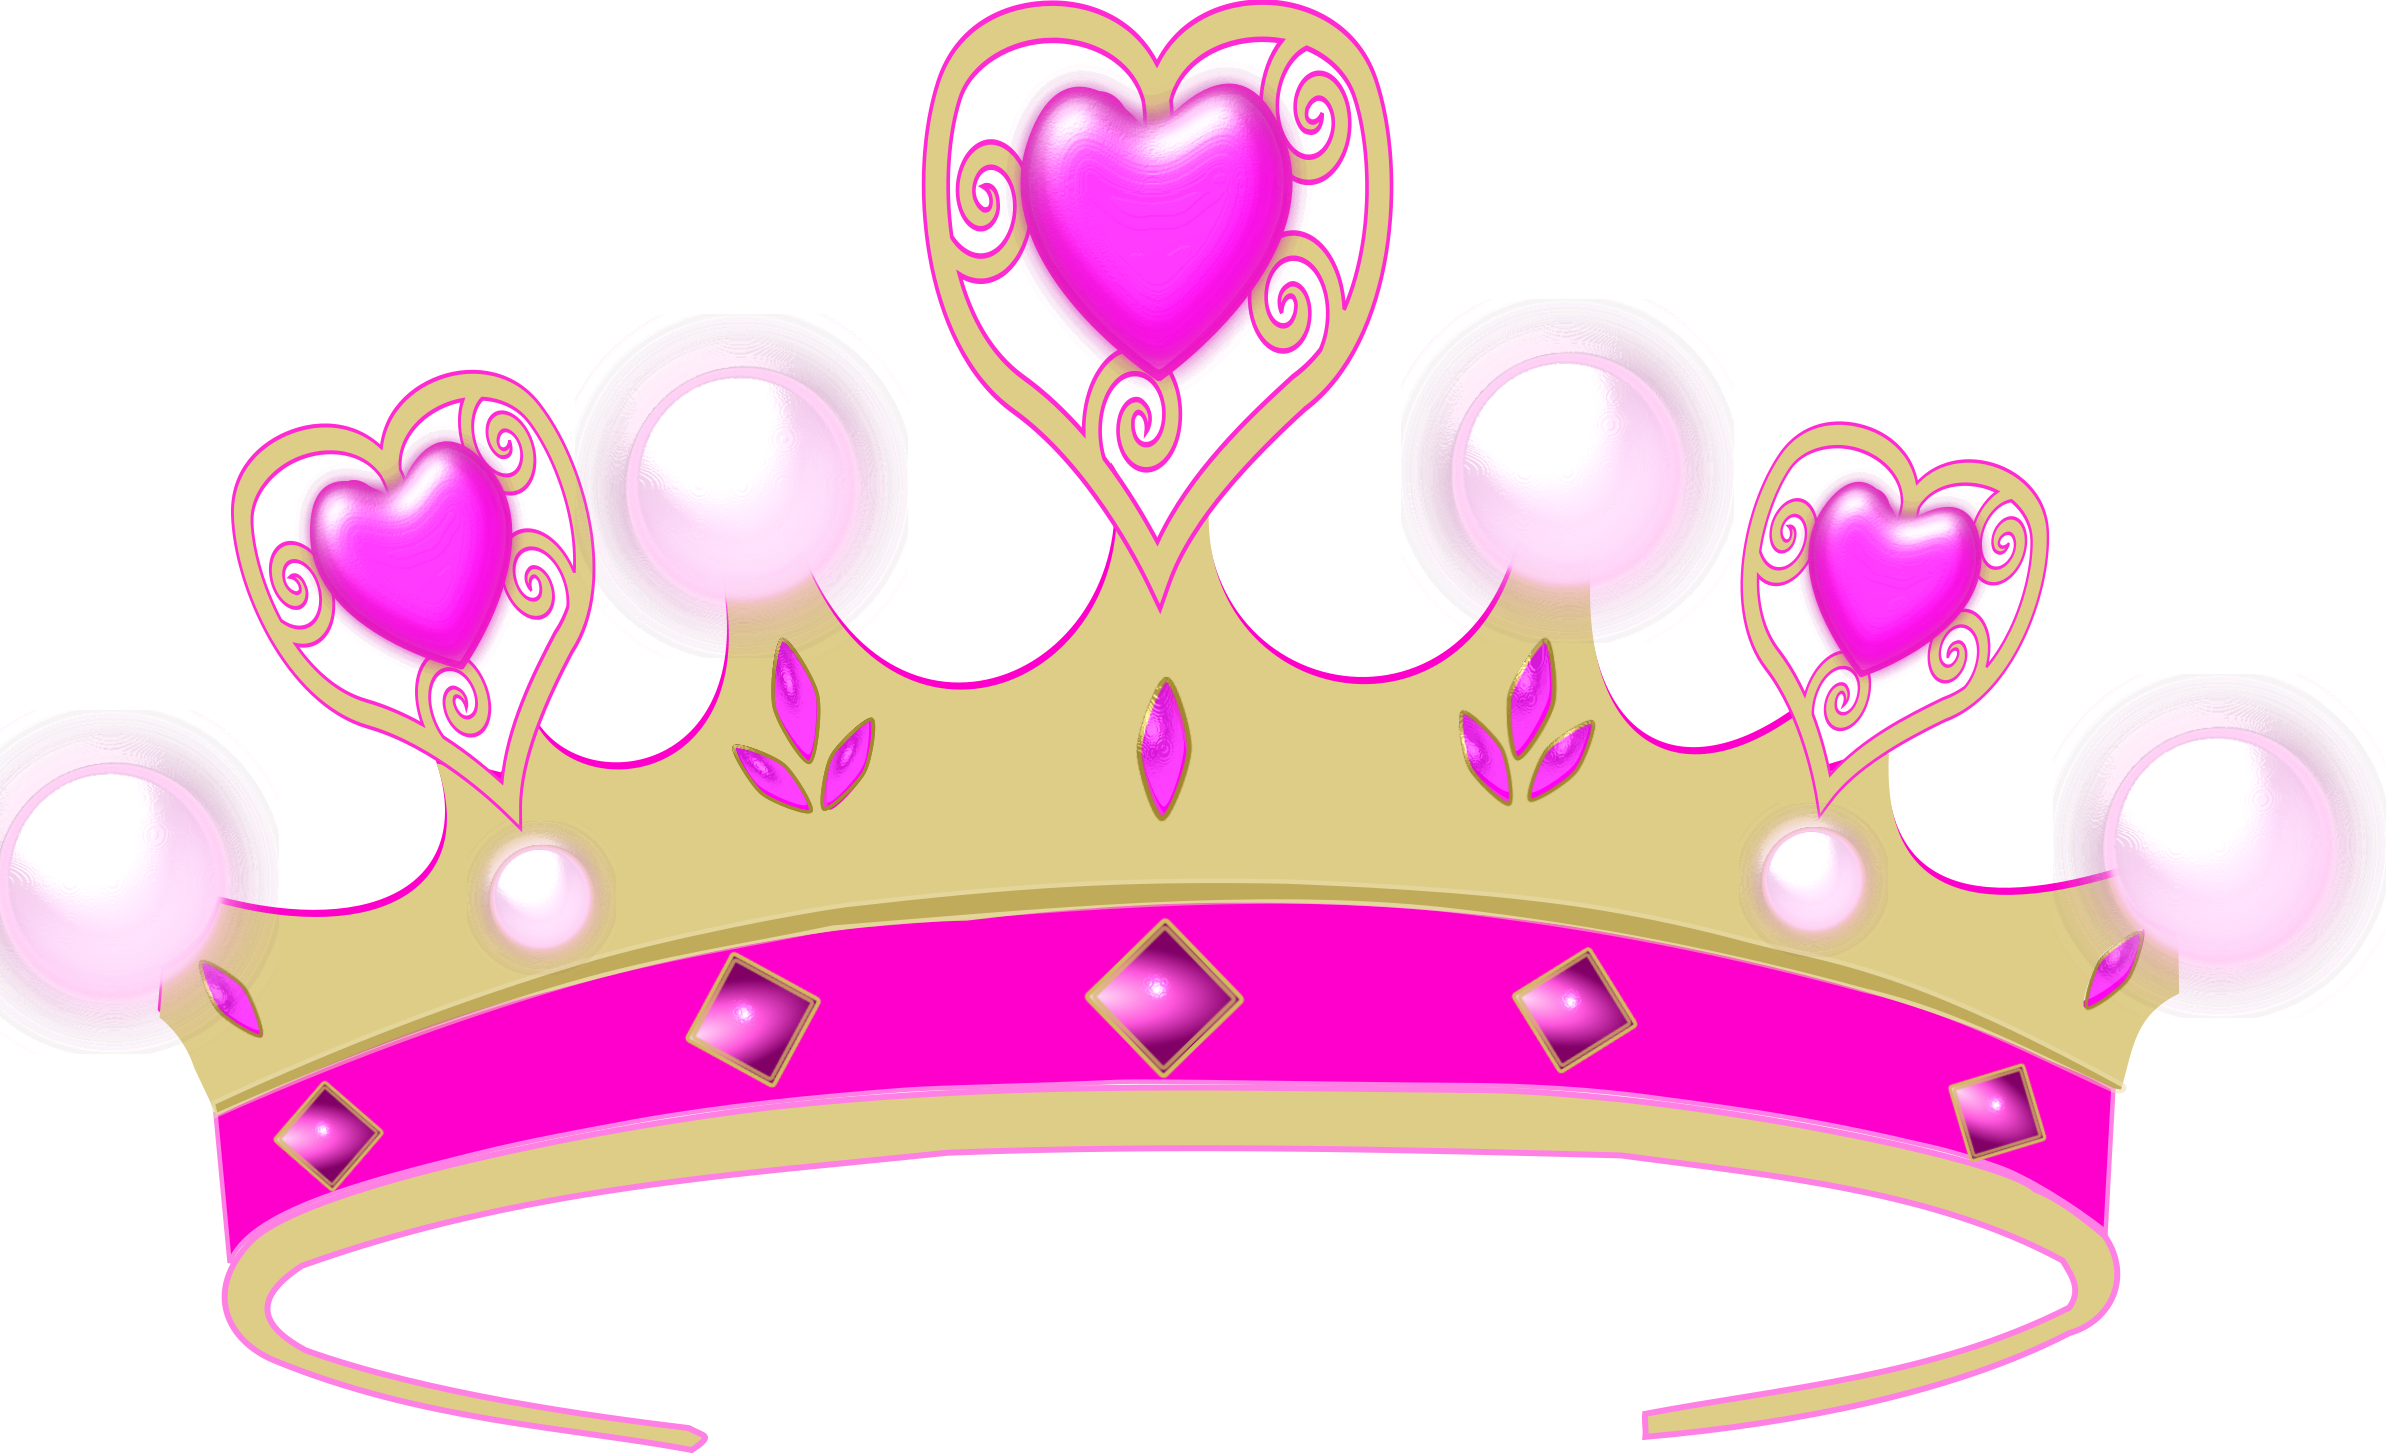  collection of disney. Fairytale clipart queen